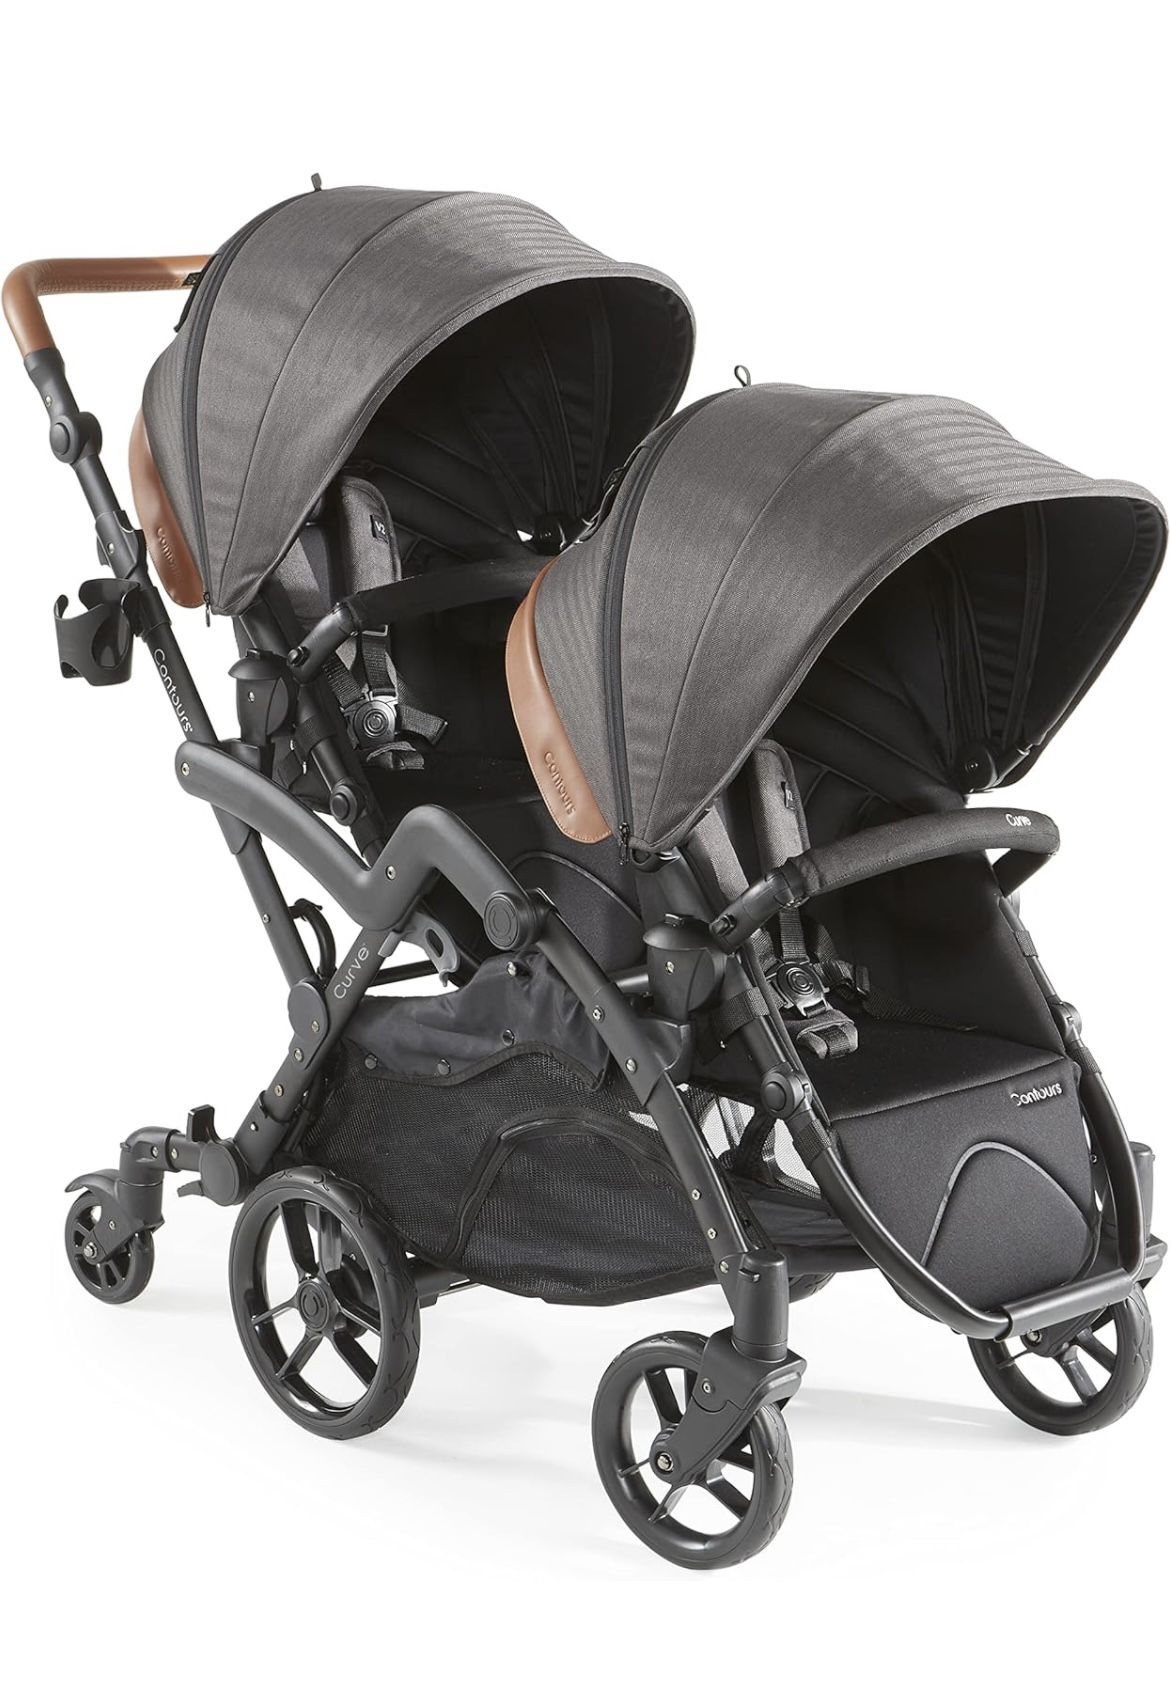 Stroller For Twins Contours Curve V2 Rotate 360 Degrees 